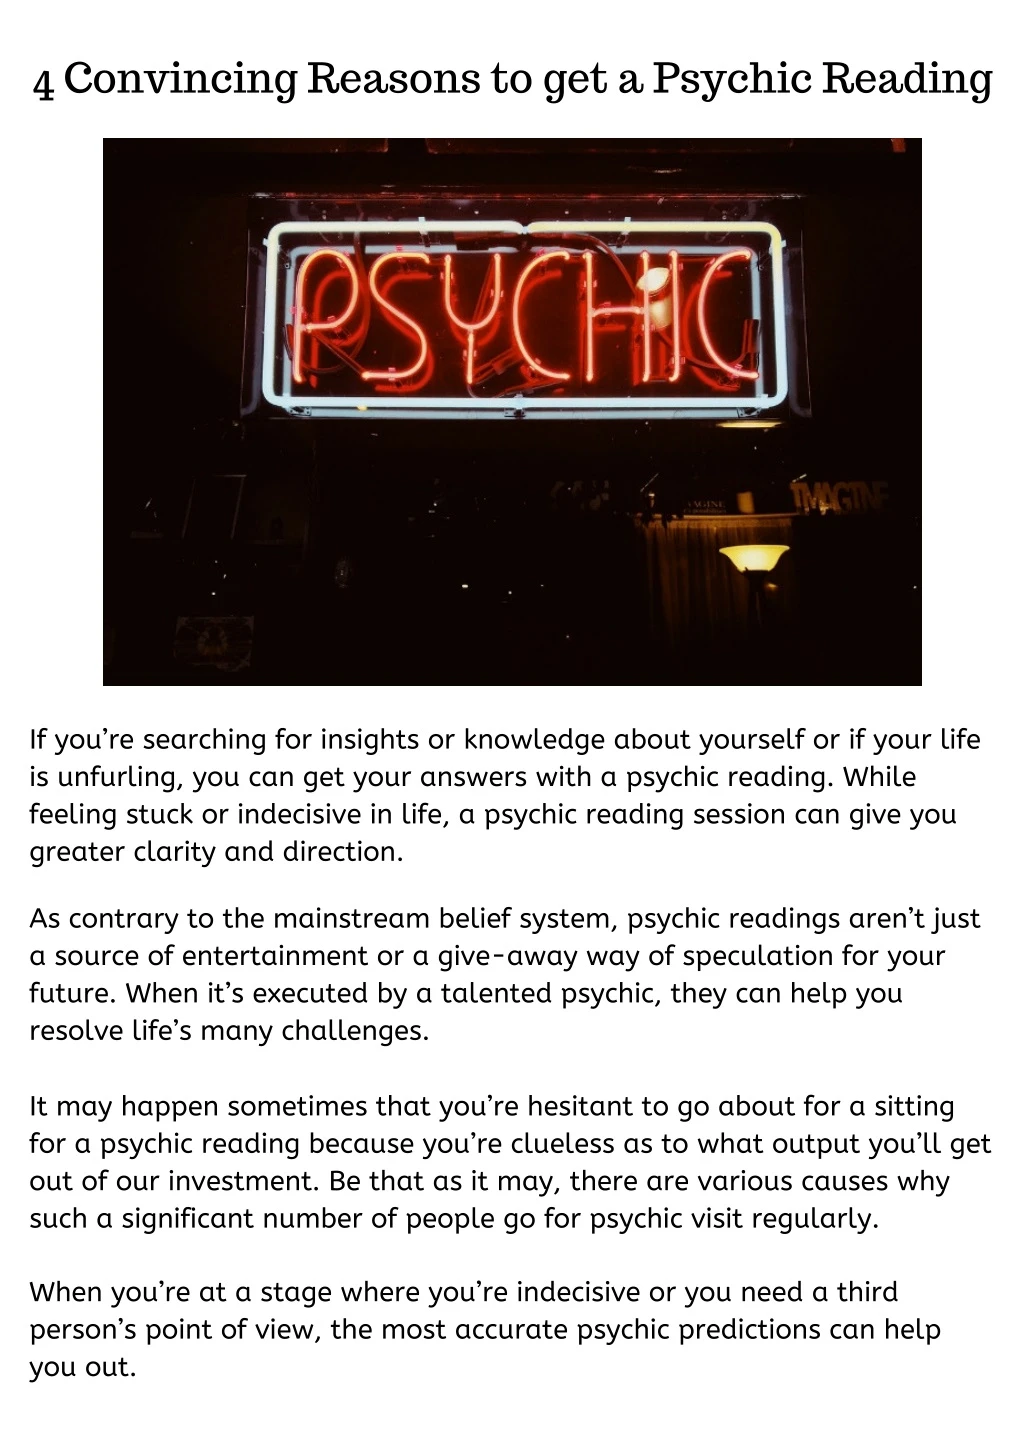 4 convincing reasons to get a psychic reading